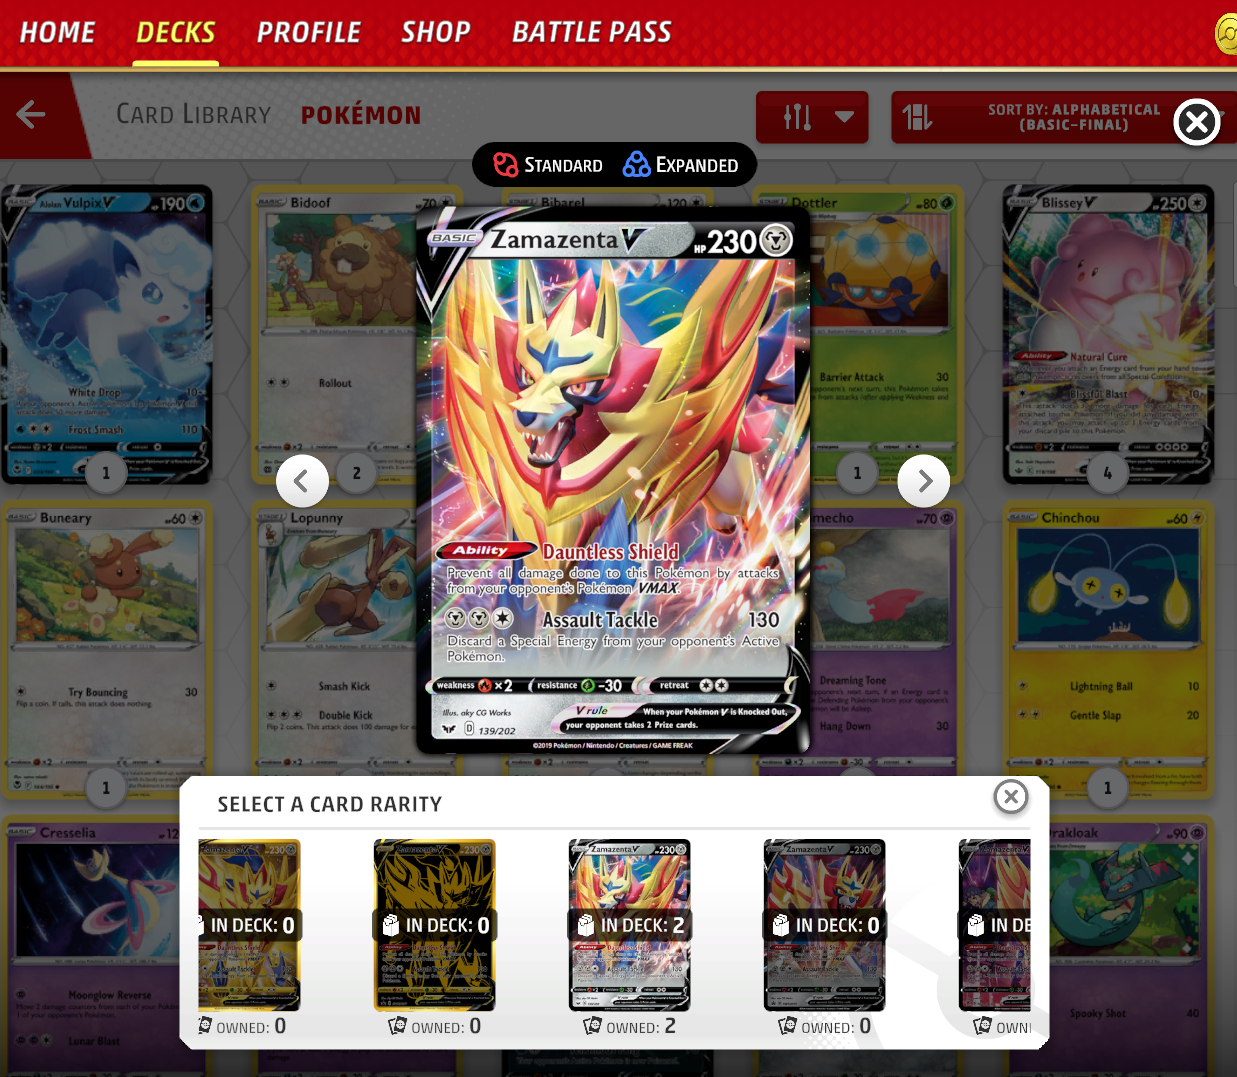 screenshot of the card UI with the variations and rarities of the card displayed.